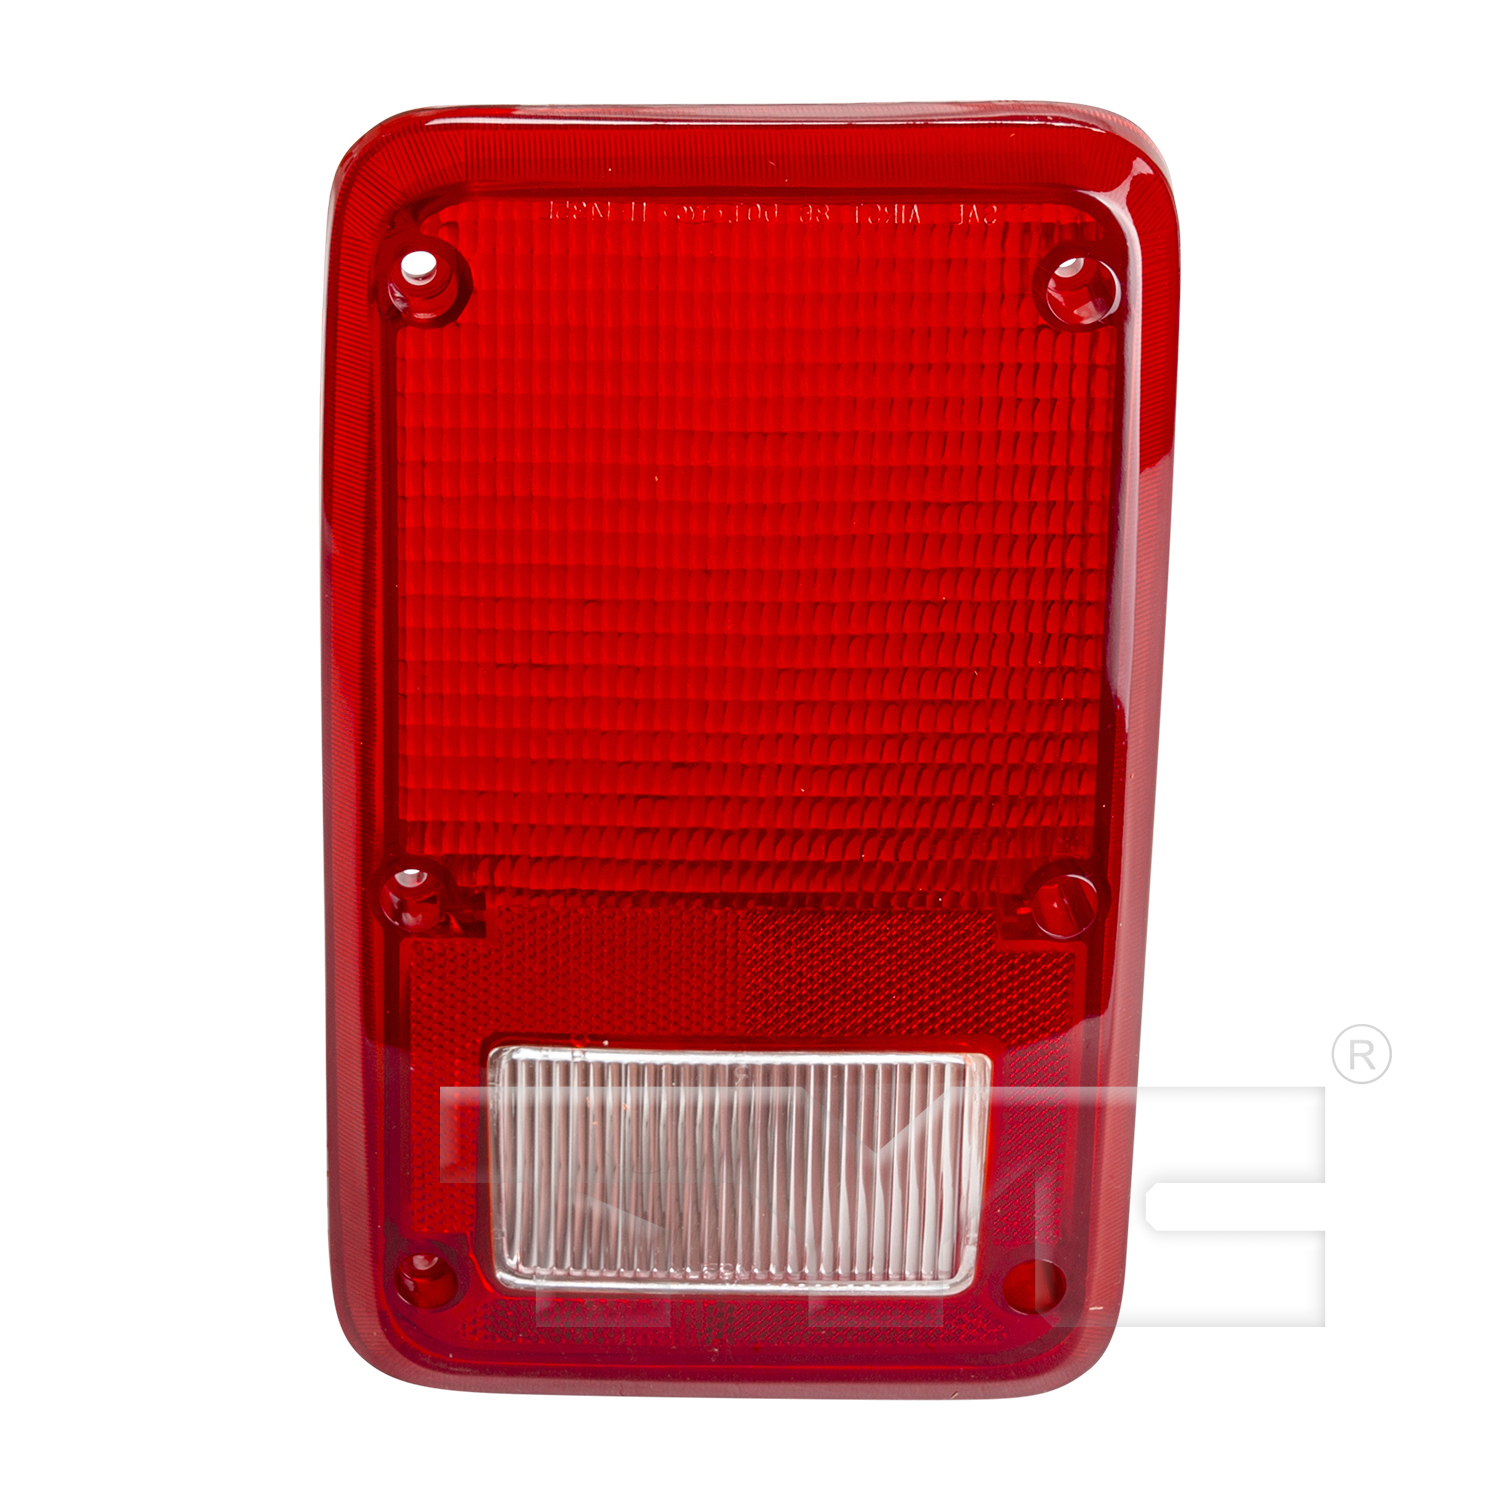 Aftermarket TAILLIGHTS for DODGE - B150, B150,81-93,LT Taillamp lens